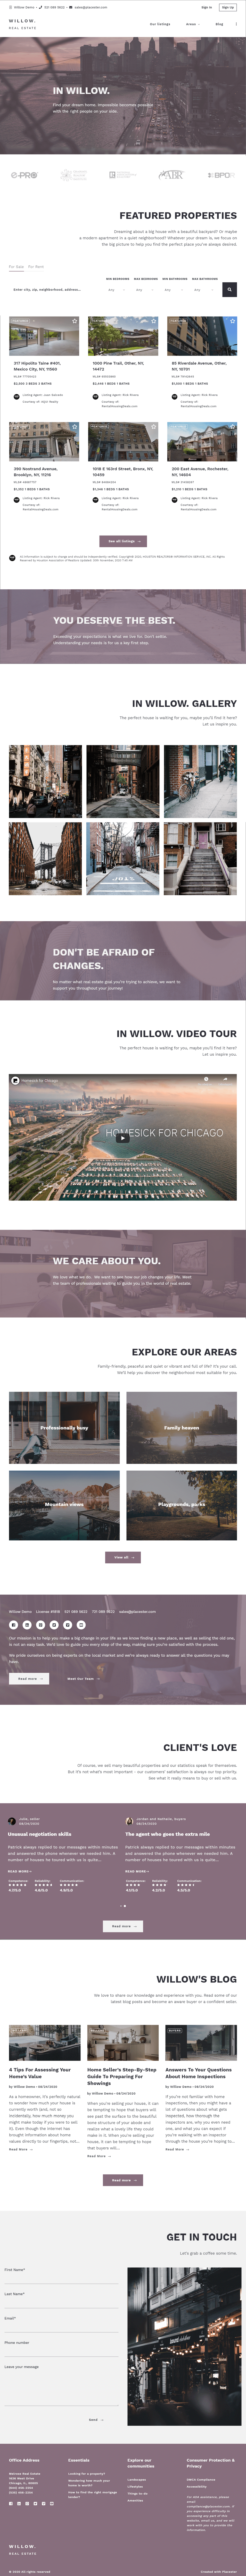 Get the real estate website you’ve always wanted!